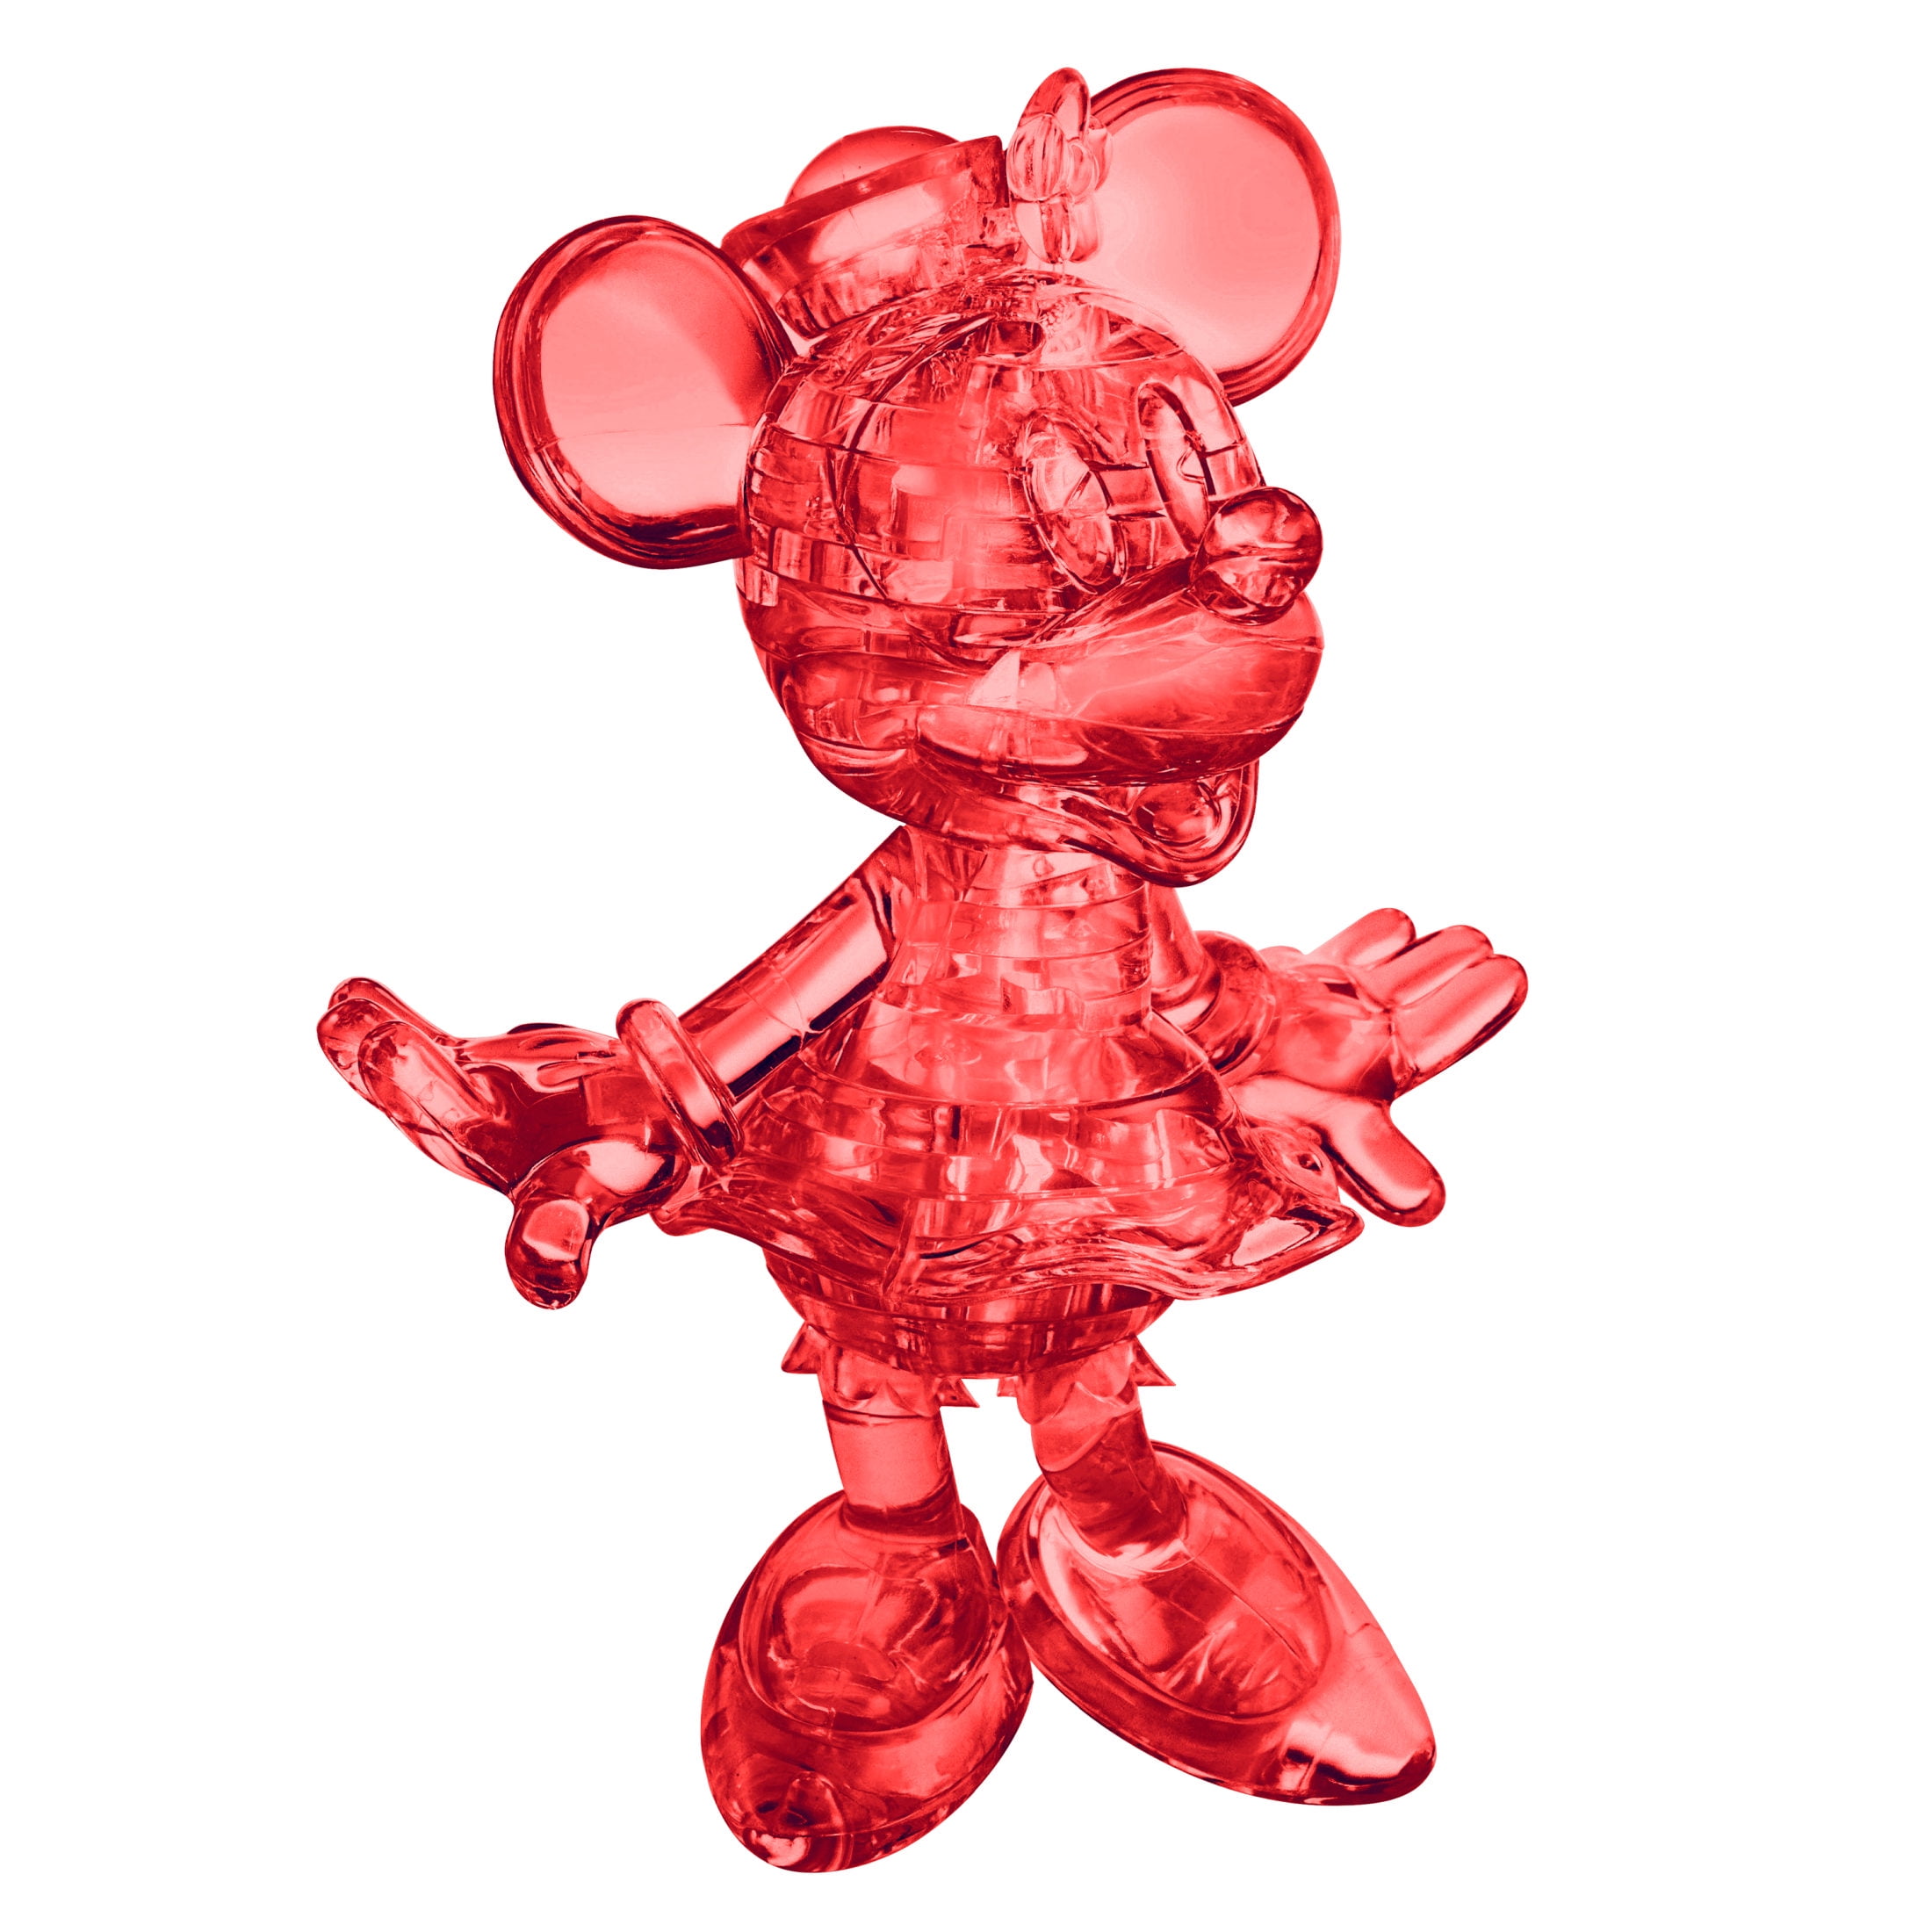 Disney Minnie Mouse Original 3D Crystal Puzzle by BePuzzled, Ages 12 and Up -